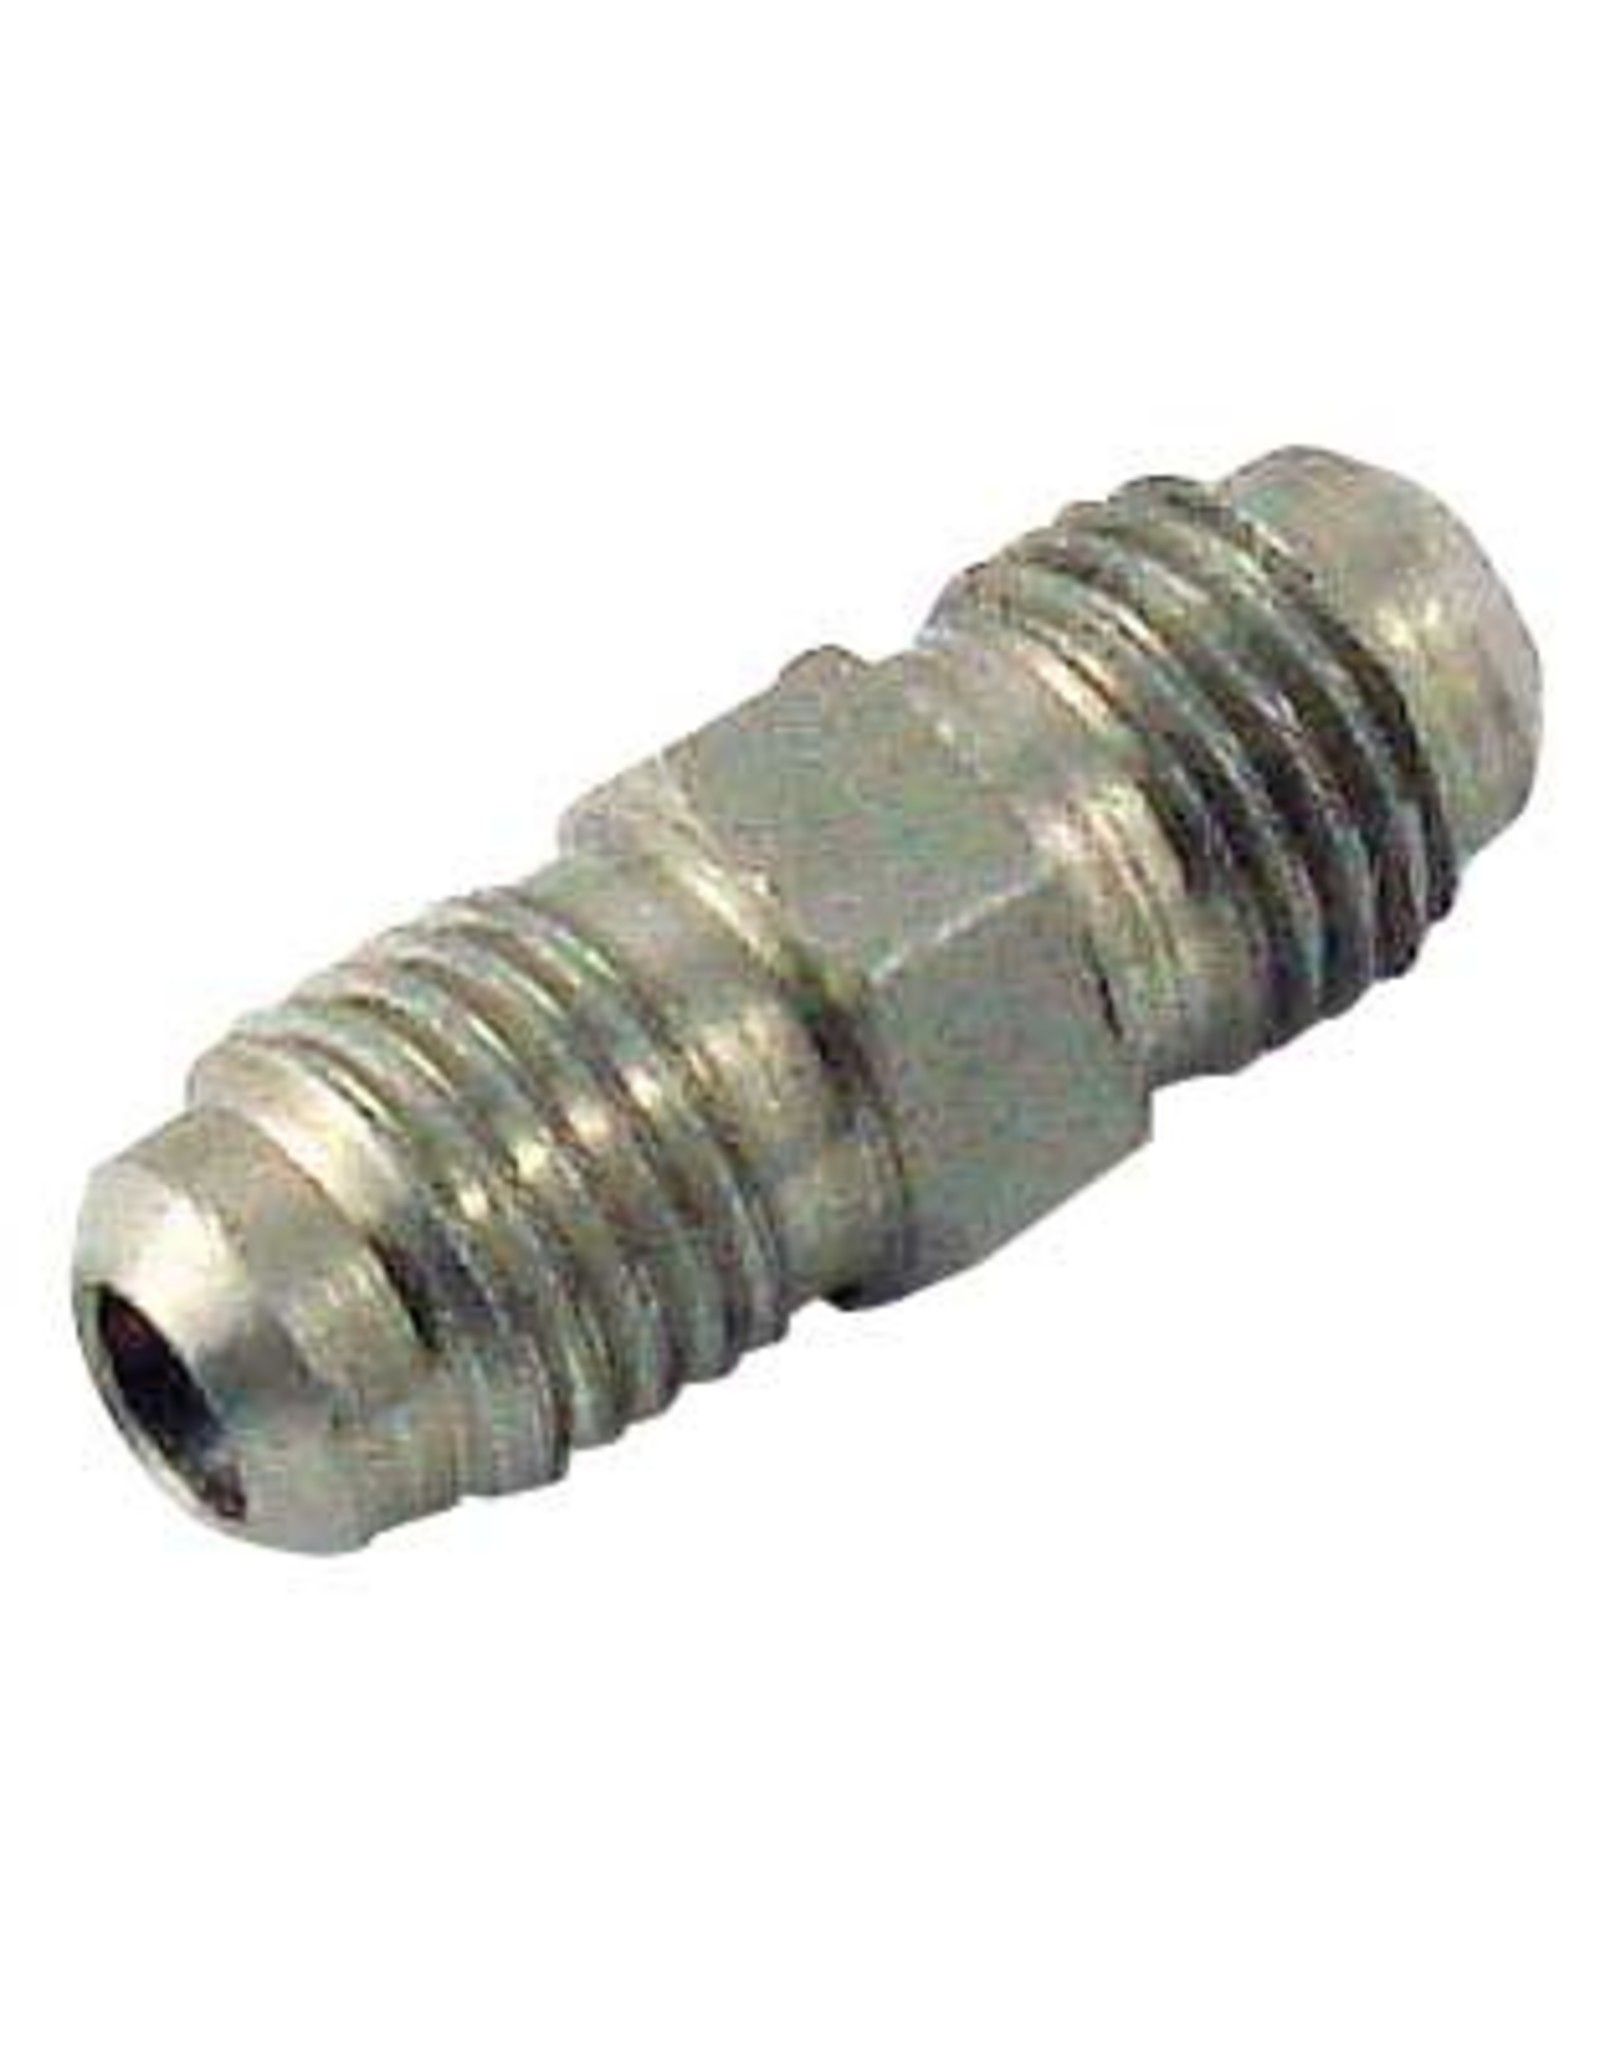 Flare Fitting/Flare Adapter 3/8" x 1/2"-16